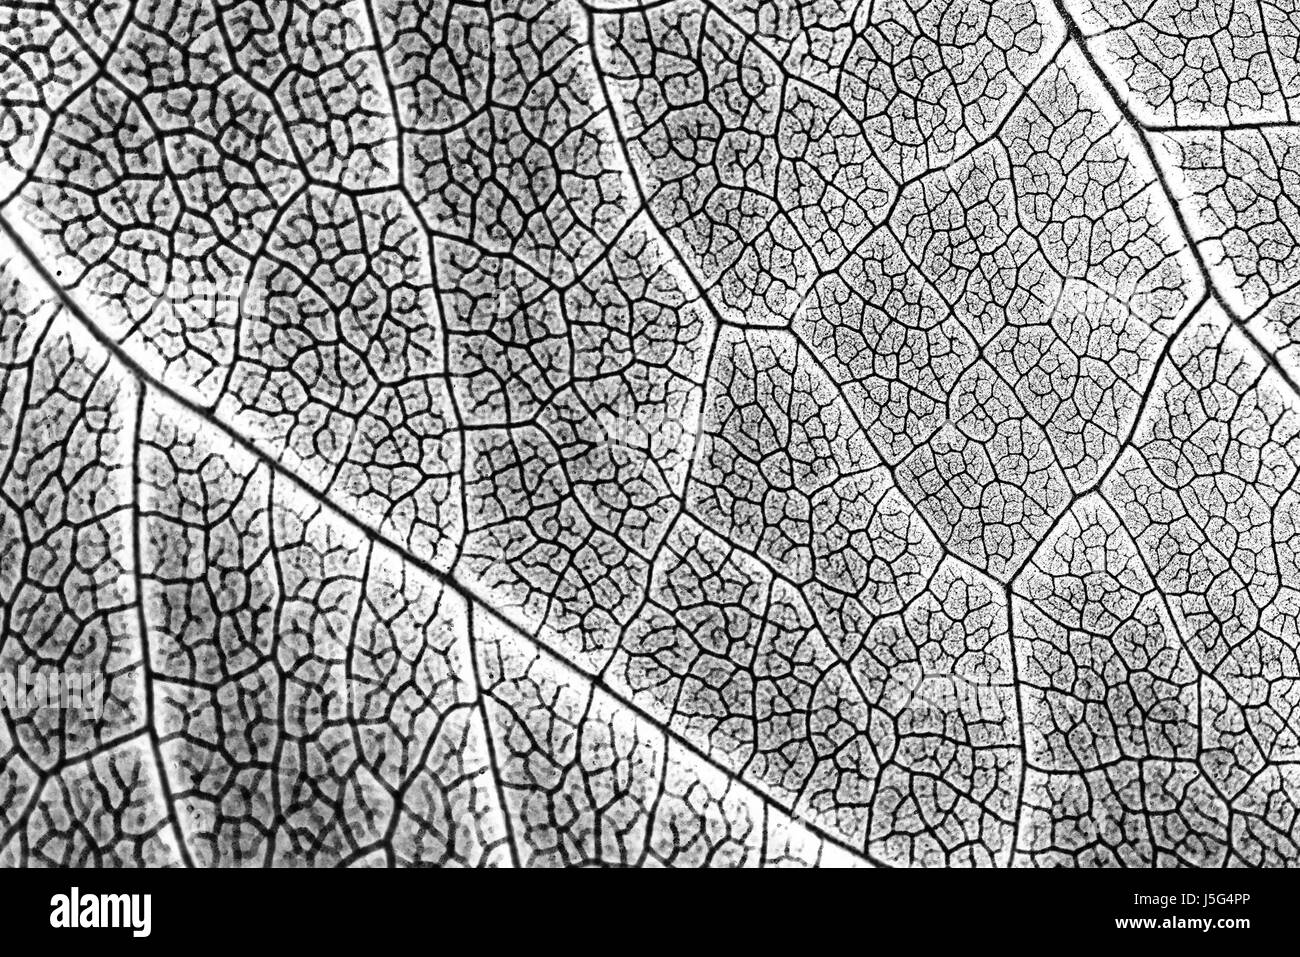 Infrared Leaf Texture With Visible Stomata Covering The Outer Epidermis Layer Stock Photo